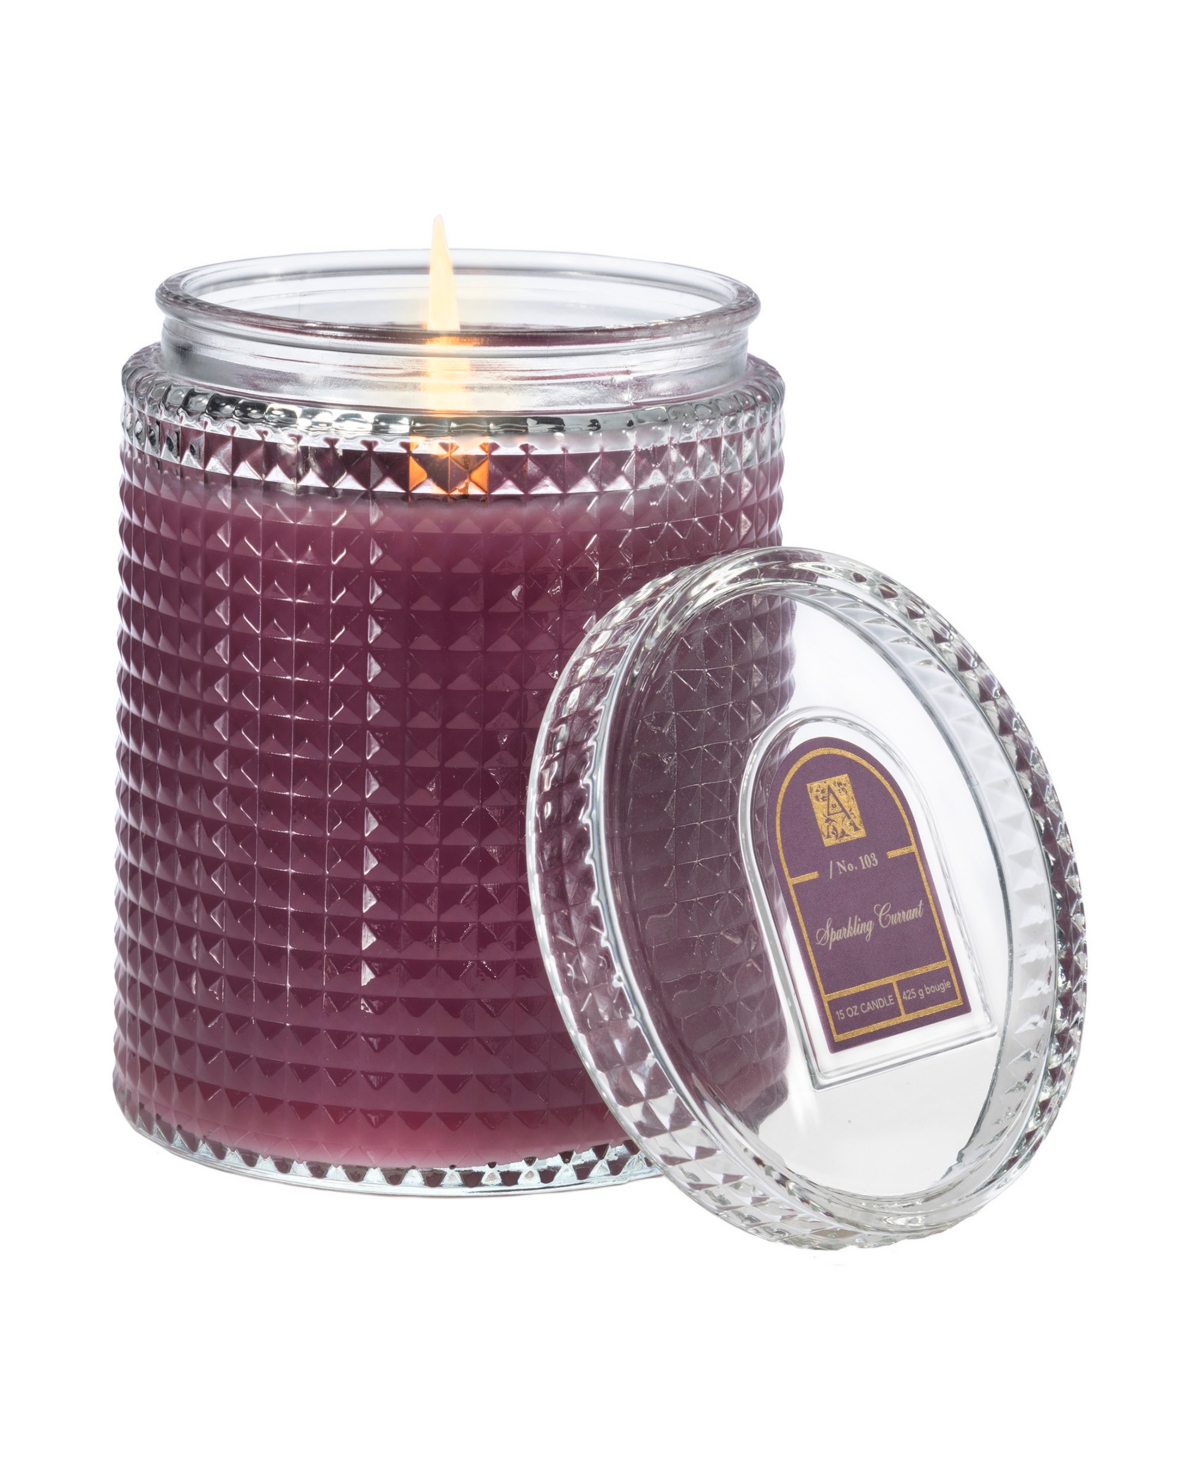 Sparkling Currant Textured Glass Candle, 15 oz - Dark Pink